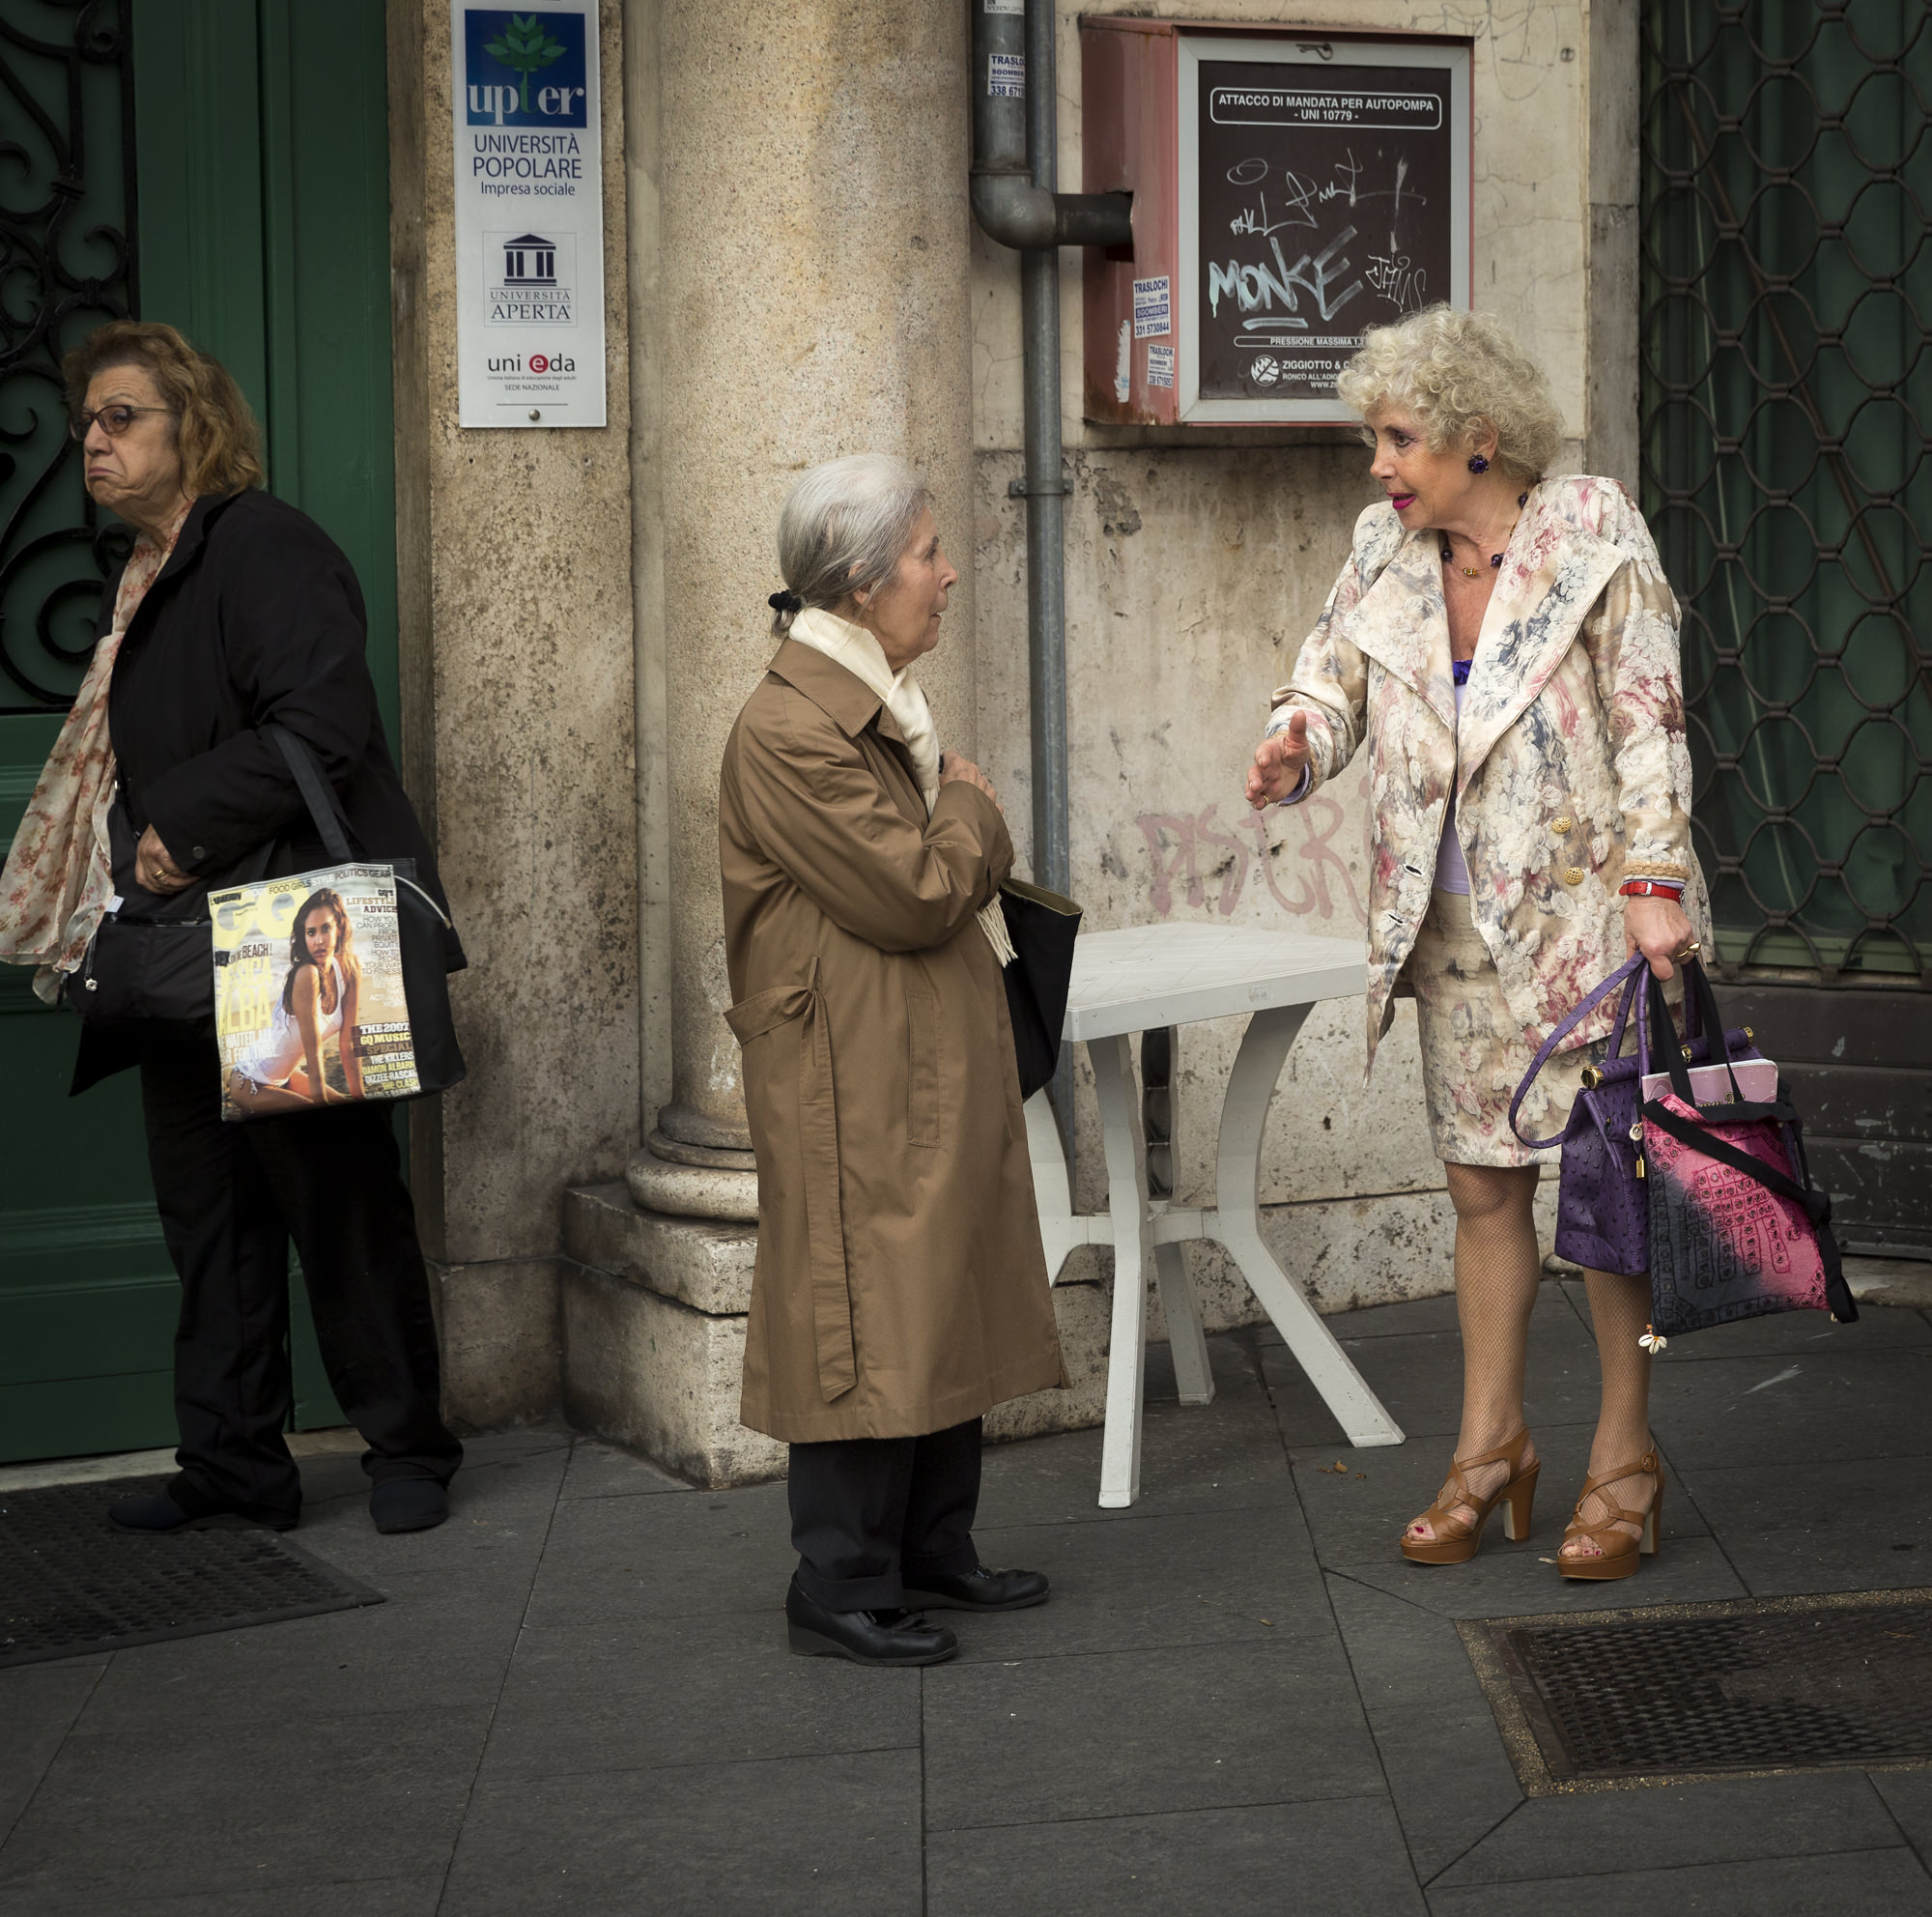 Rome. I first saw these two women deep in conversation which would have made for a nice shot, but then the third woman appeared carrying a shopping bag with the picture of a young woman and suddenly there were a couple of more layers to the shot. Canon 5D MIII with 24-70mm lens set to 70mm, 1/350 sec. ISO 800